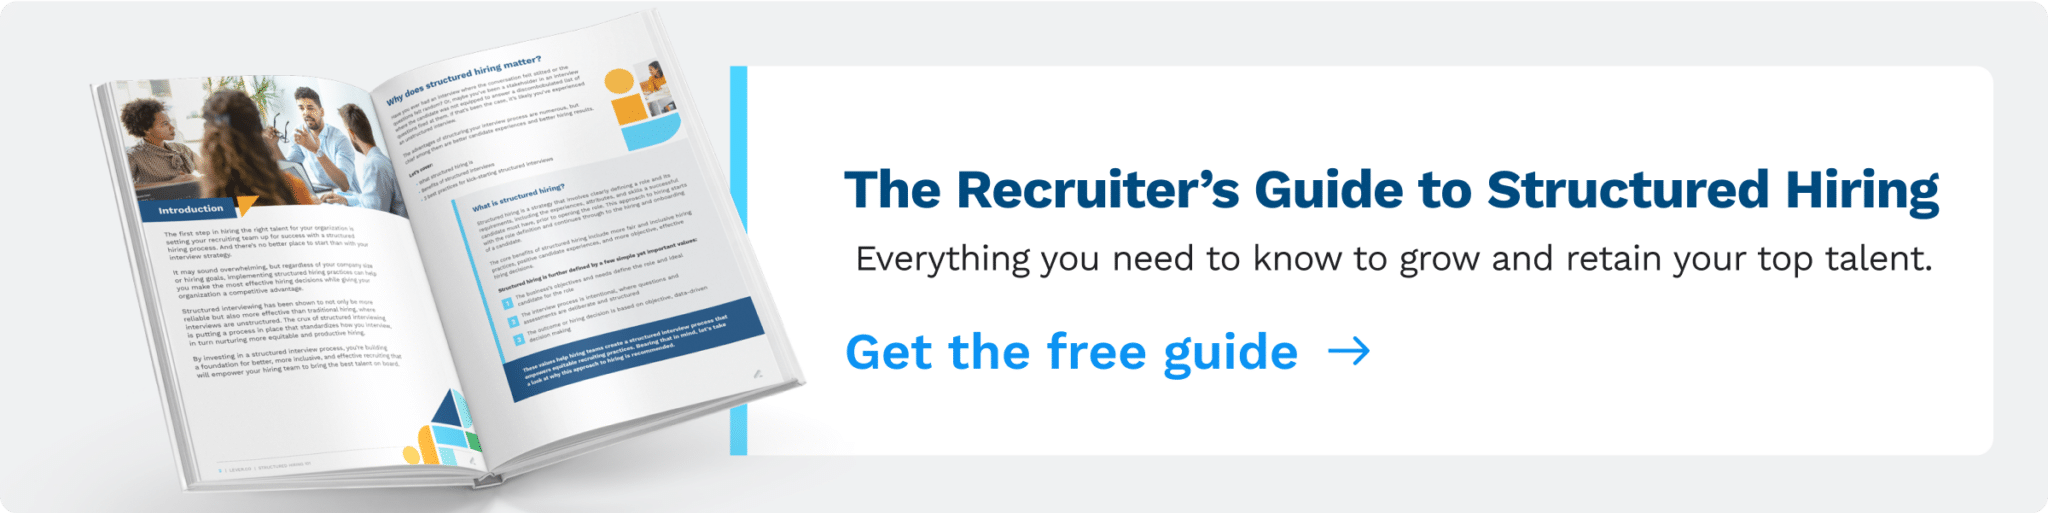 The Recruiter's Guide to Structured Hiring